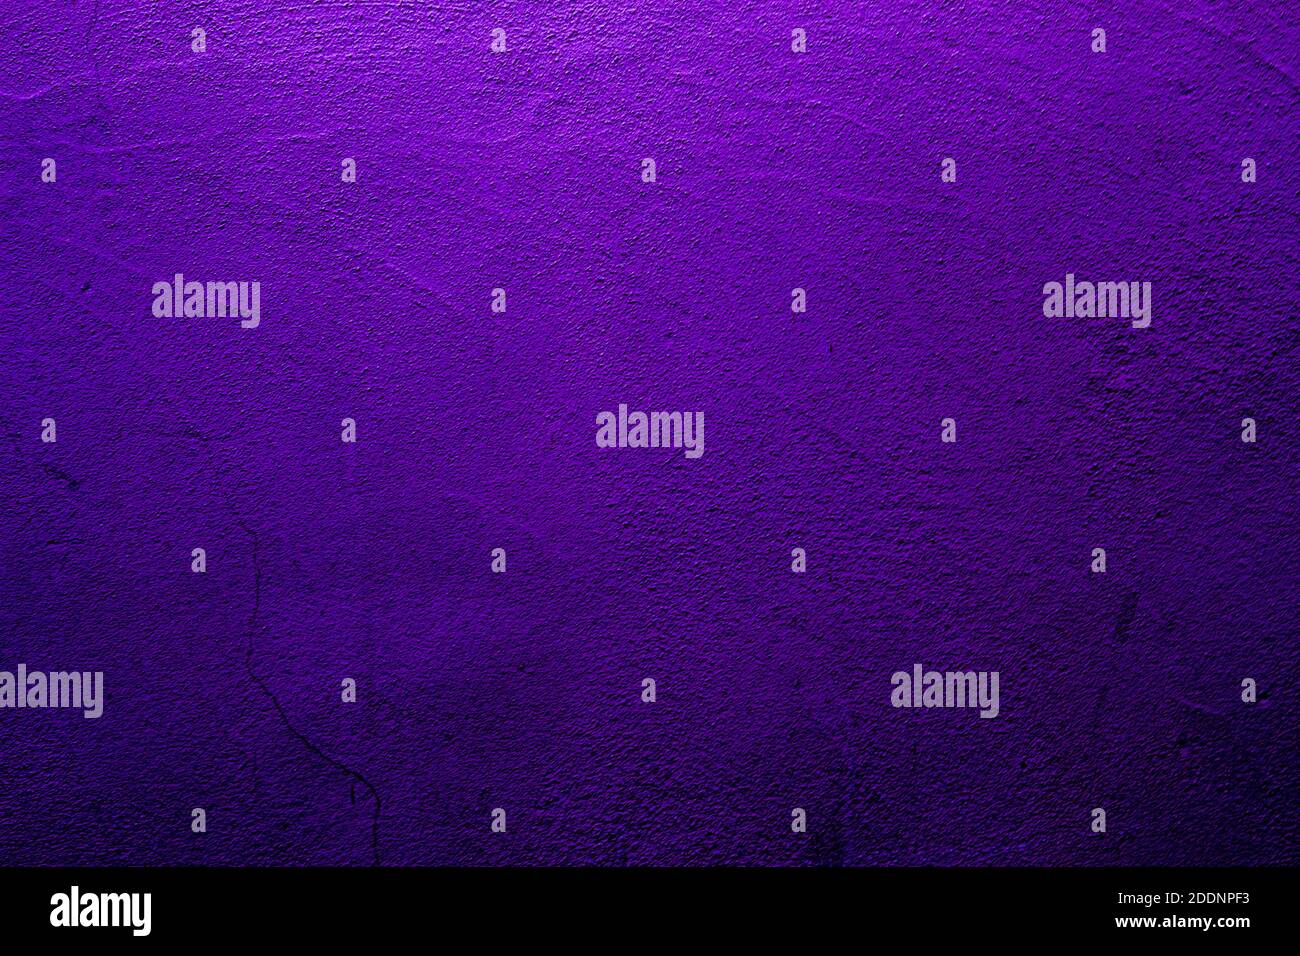 Light purple colored background with textures of different shades of purple and violet Stock Photo